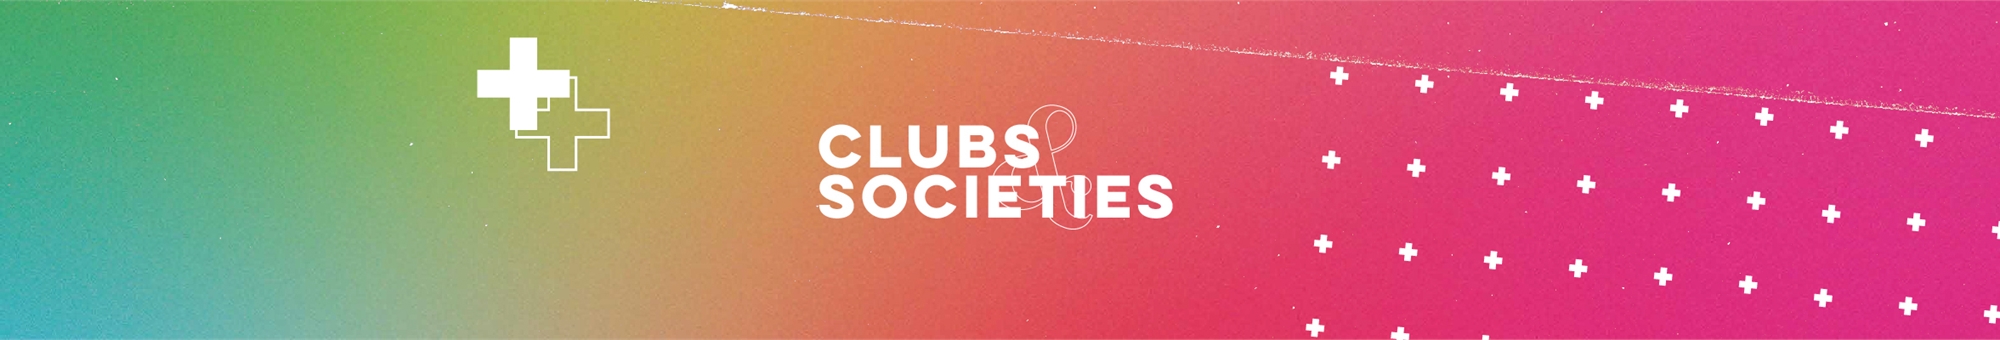 Find out about the Clubs and Societies already on your campus that you can join, and how to start your own!